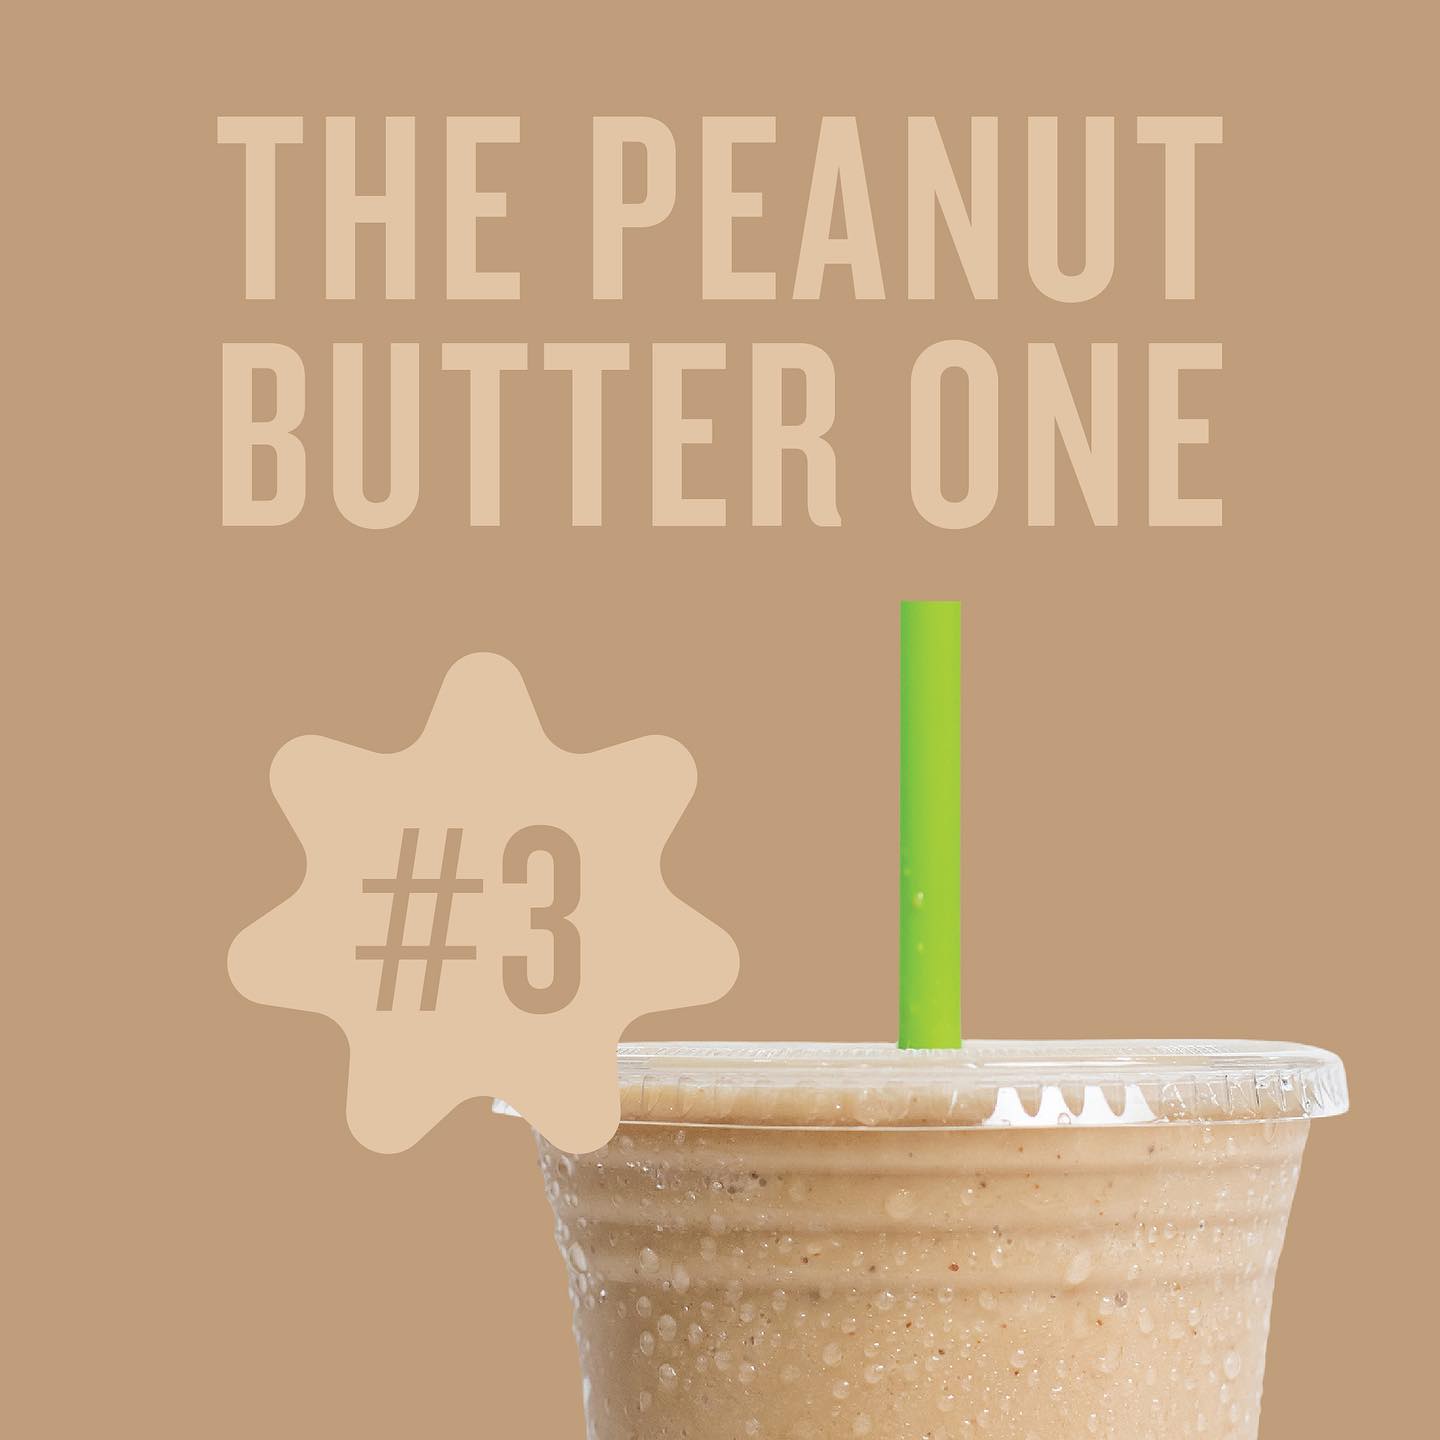 Light brown The Peanut Butter One smoothie from Clean Juice